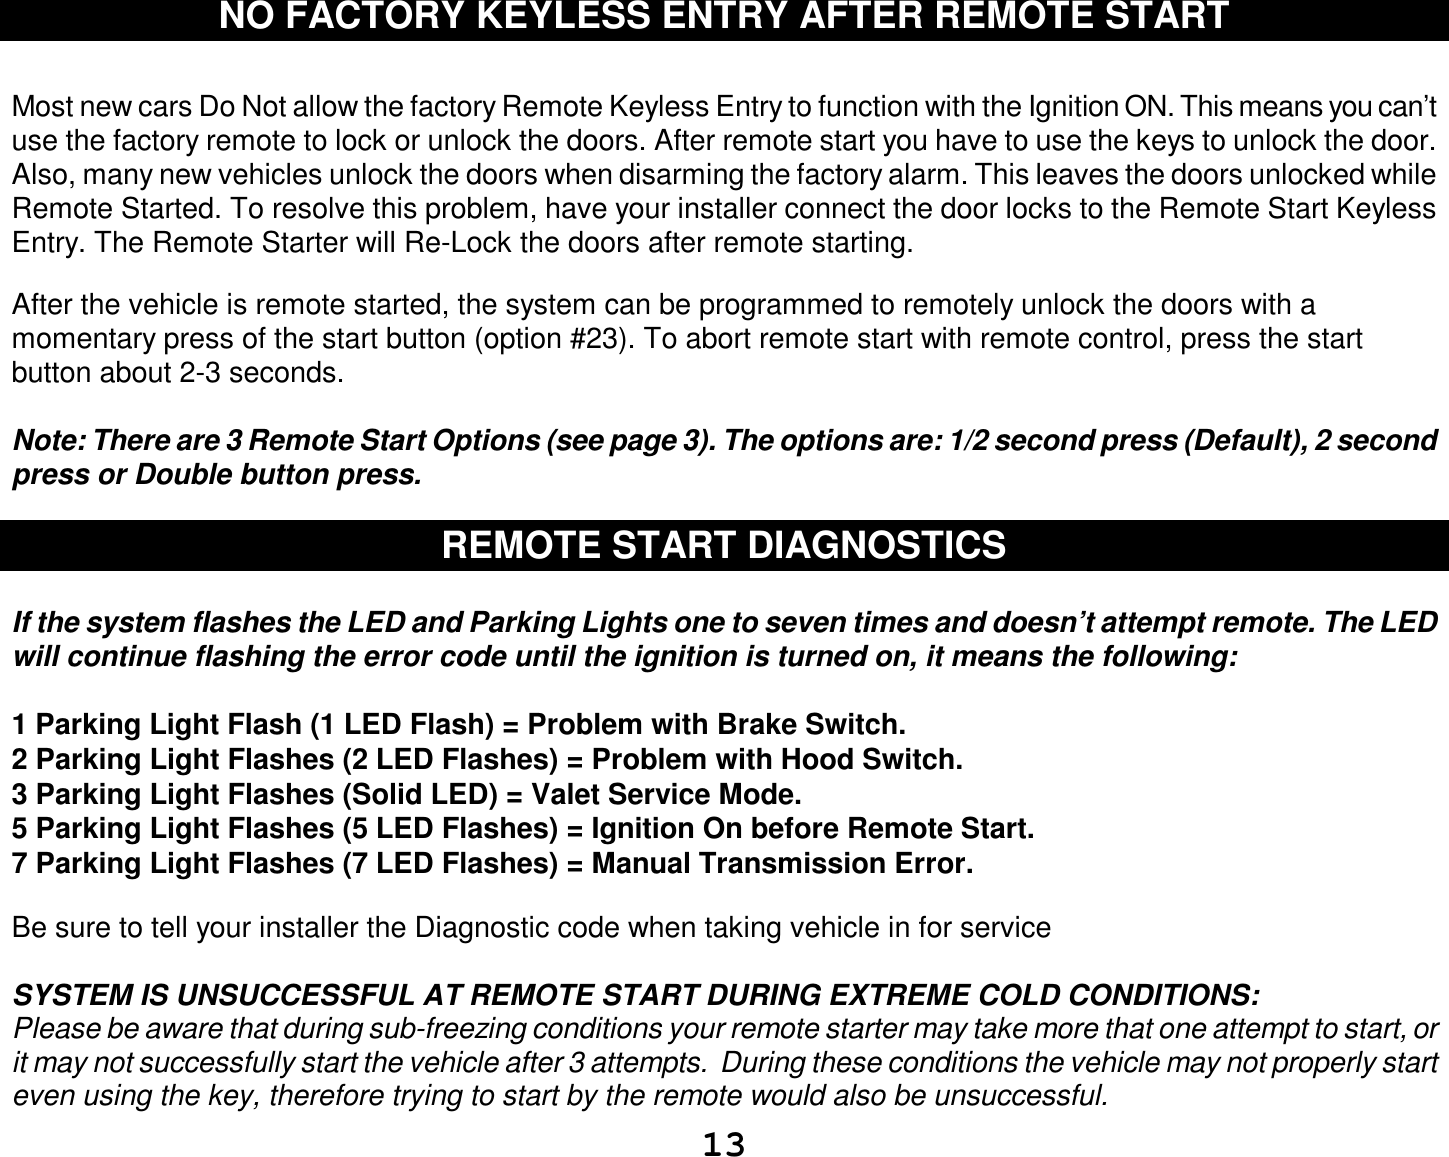  13 NO FACTORY KEYLESS ENTRY AFTER REMOTE START   Most new cars Do Not allow the factory Remote Keyless Entry to function with the Ignition ON. This means you can’t use the factory remote to lock or unlock the doors. After remote start you have to use the keys to unlock the door. Also, many new vehicles unlock the doors when disarming the factory alarm. This leaves the doors unlocked while Remote Started. To resolve this problem, have your installer connect the door locks to the Remote Start Keyless Entry. The Remote Starter will Re-Lock the doors after remote starting.  After the vehicle is remote started, the system can be programmed to remotely unlock the doors with a momentary press of the start button (option #23). To abort remote start with remote control, press the start button about 2-3 seconds.  Note: There are 3 Remote Start Options (see page 3). The options are: 1/2 second press (Default), 2 second press or Double button press.  REMOTE START DIAGNOSTICS  If the system flashes the LED and Parking Lights one to seven times and doesn’t attempt remote. The LED will continue flashing the error code until the ignition is turned on, it means the following:  1 Parking Light Flash (1 LED Flash) = Problem with Brake Switch.  2 Parking Light Flashes (2 LED Flashes) = Problem with Hood Switch. 3 Parking Light Flashes (Solid LED) = Valet Service Mode. 5 Parking Light Flashes (5 LED Flashes) = Ignition On before Remote Start. 7 Parking Light Flashes (7 LED Flashes) = Manual Transmission Error.  Be sure to tell your installer the Diagnostic code when taking vehicle in for service  SYSTEM IS UNSUCCESSFUL AT REMOTE START DURING EXTREME COLD CONDITIONS: Please be aware that during sub-freezing conditions your remote starter may take more that one attempt to start, or it may not successfully start the vehicle after 3 attempts.  During these conditions the vehicle may not properly start even using the key, therefore trying to start by the remote would also be unsuccessful. 